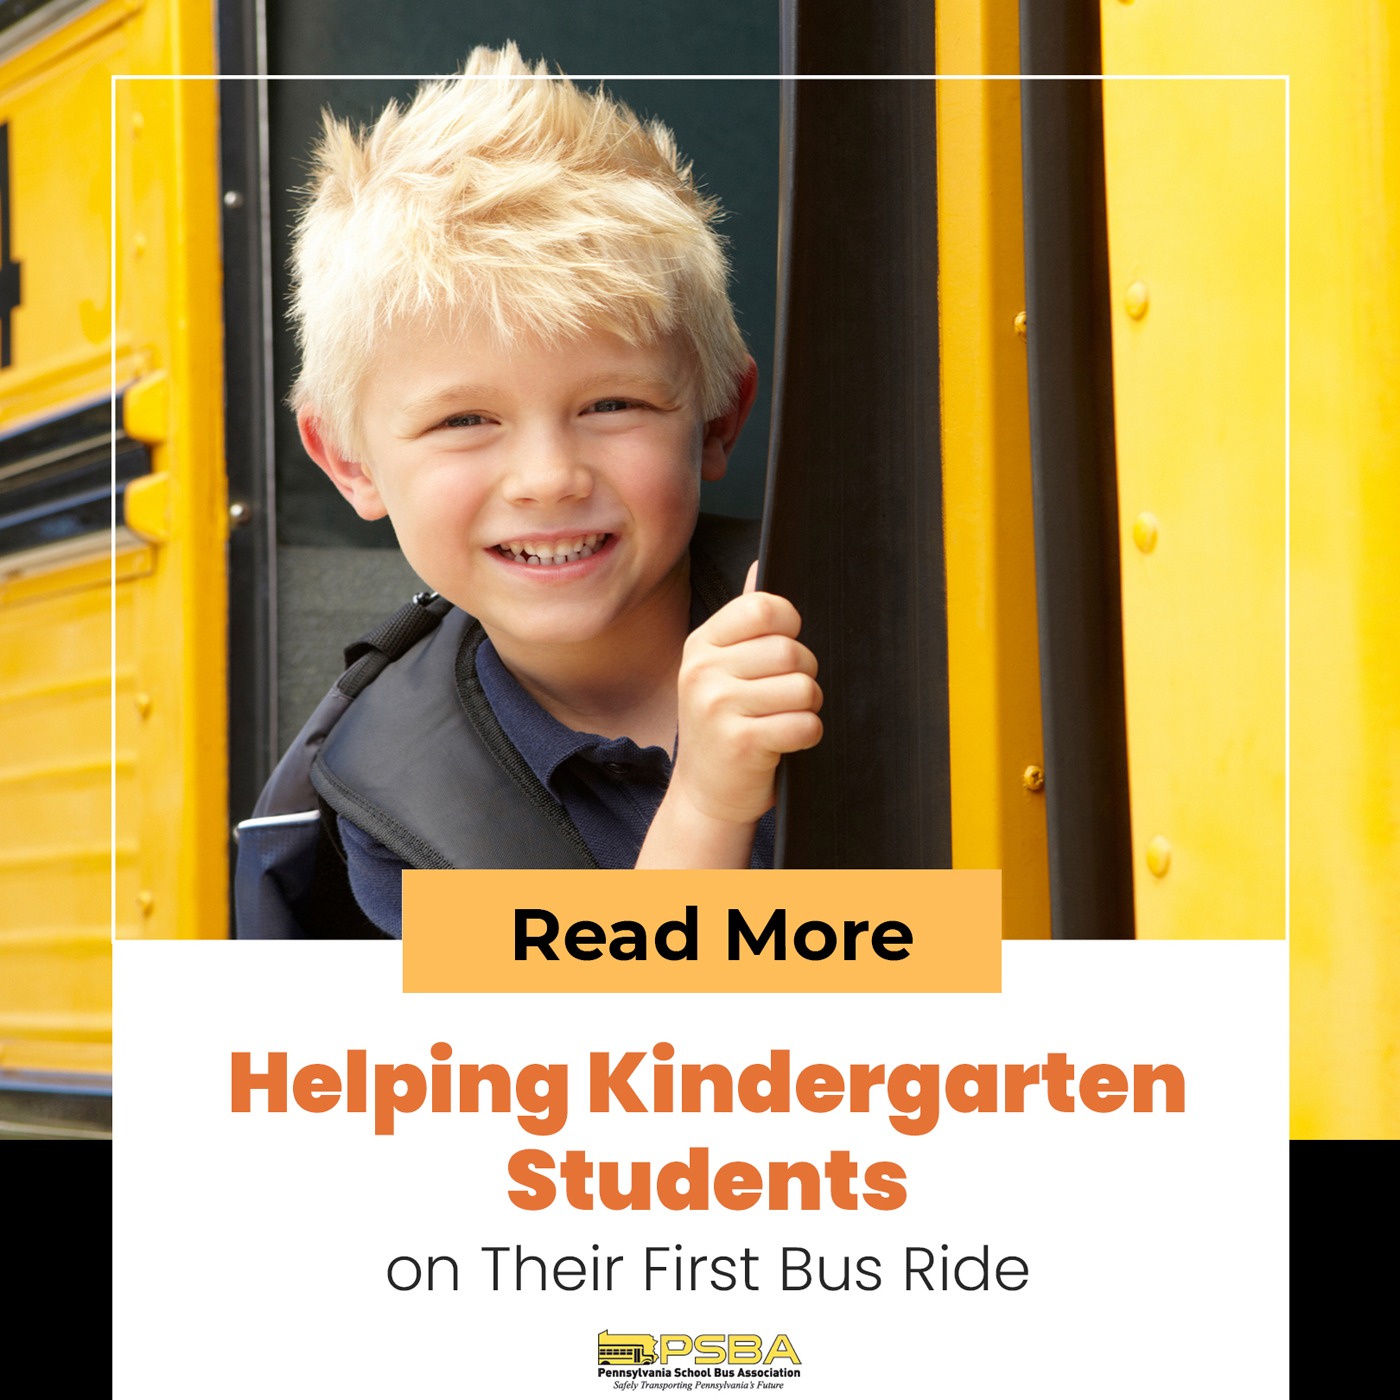 Helping Kindergarten Students on Their First Bus Ride